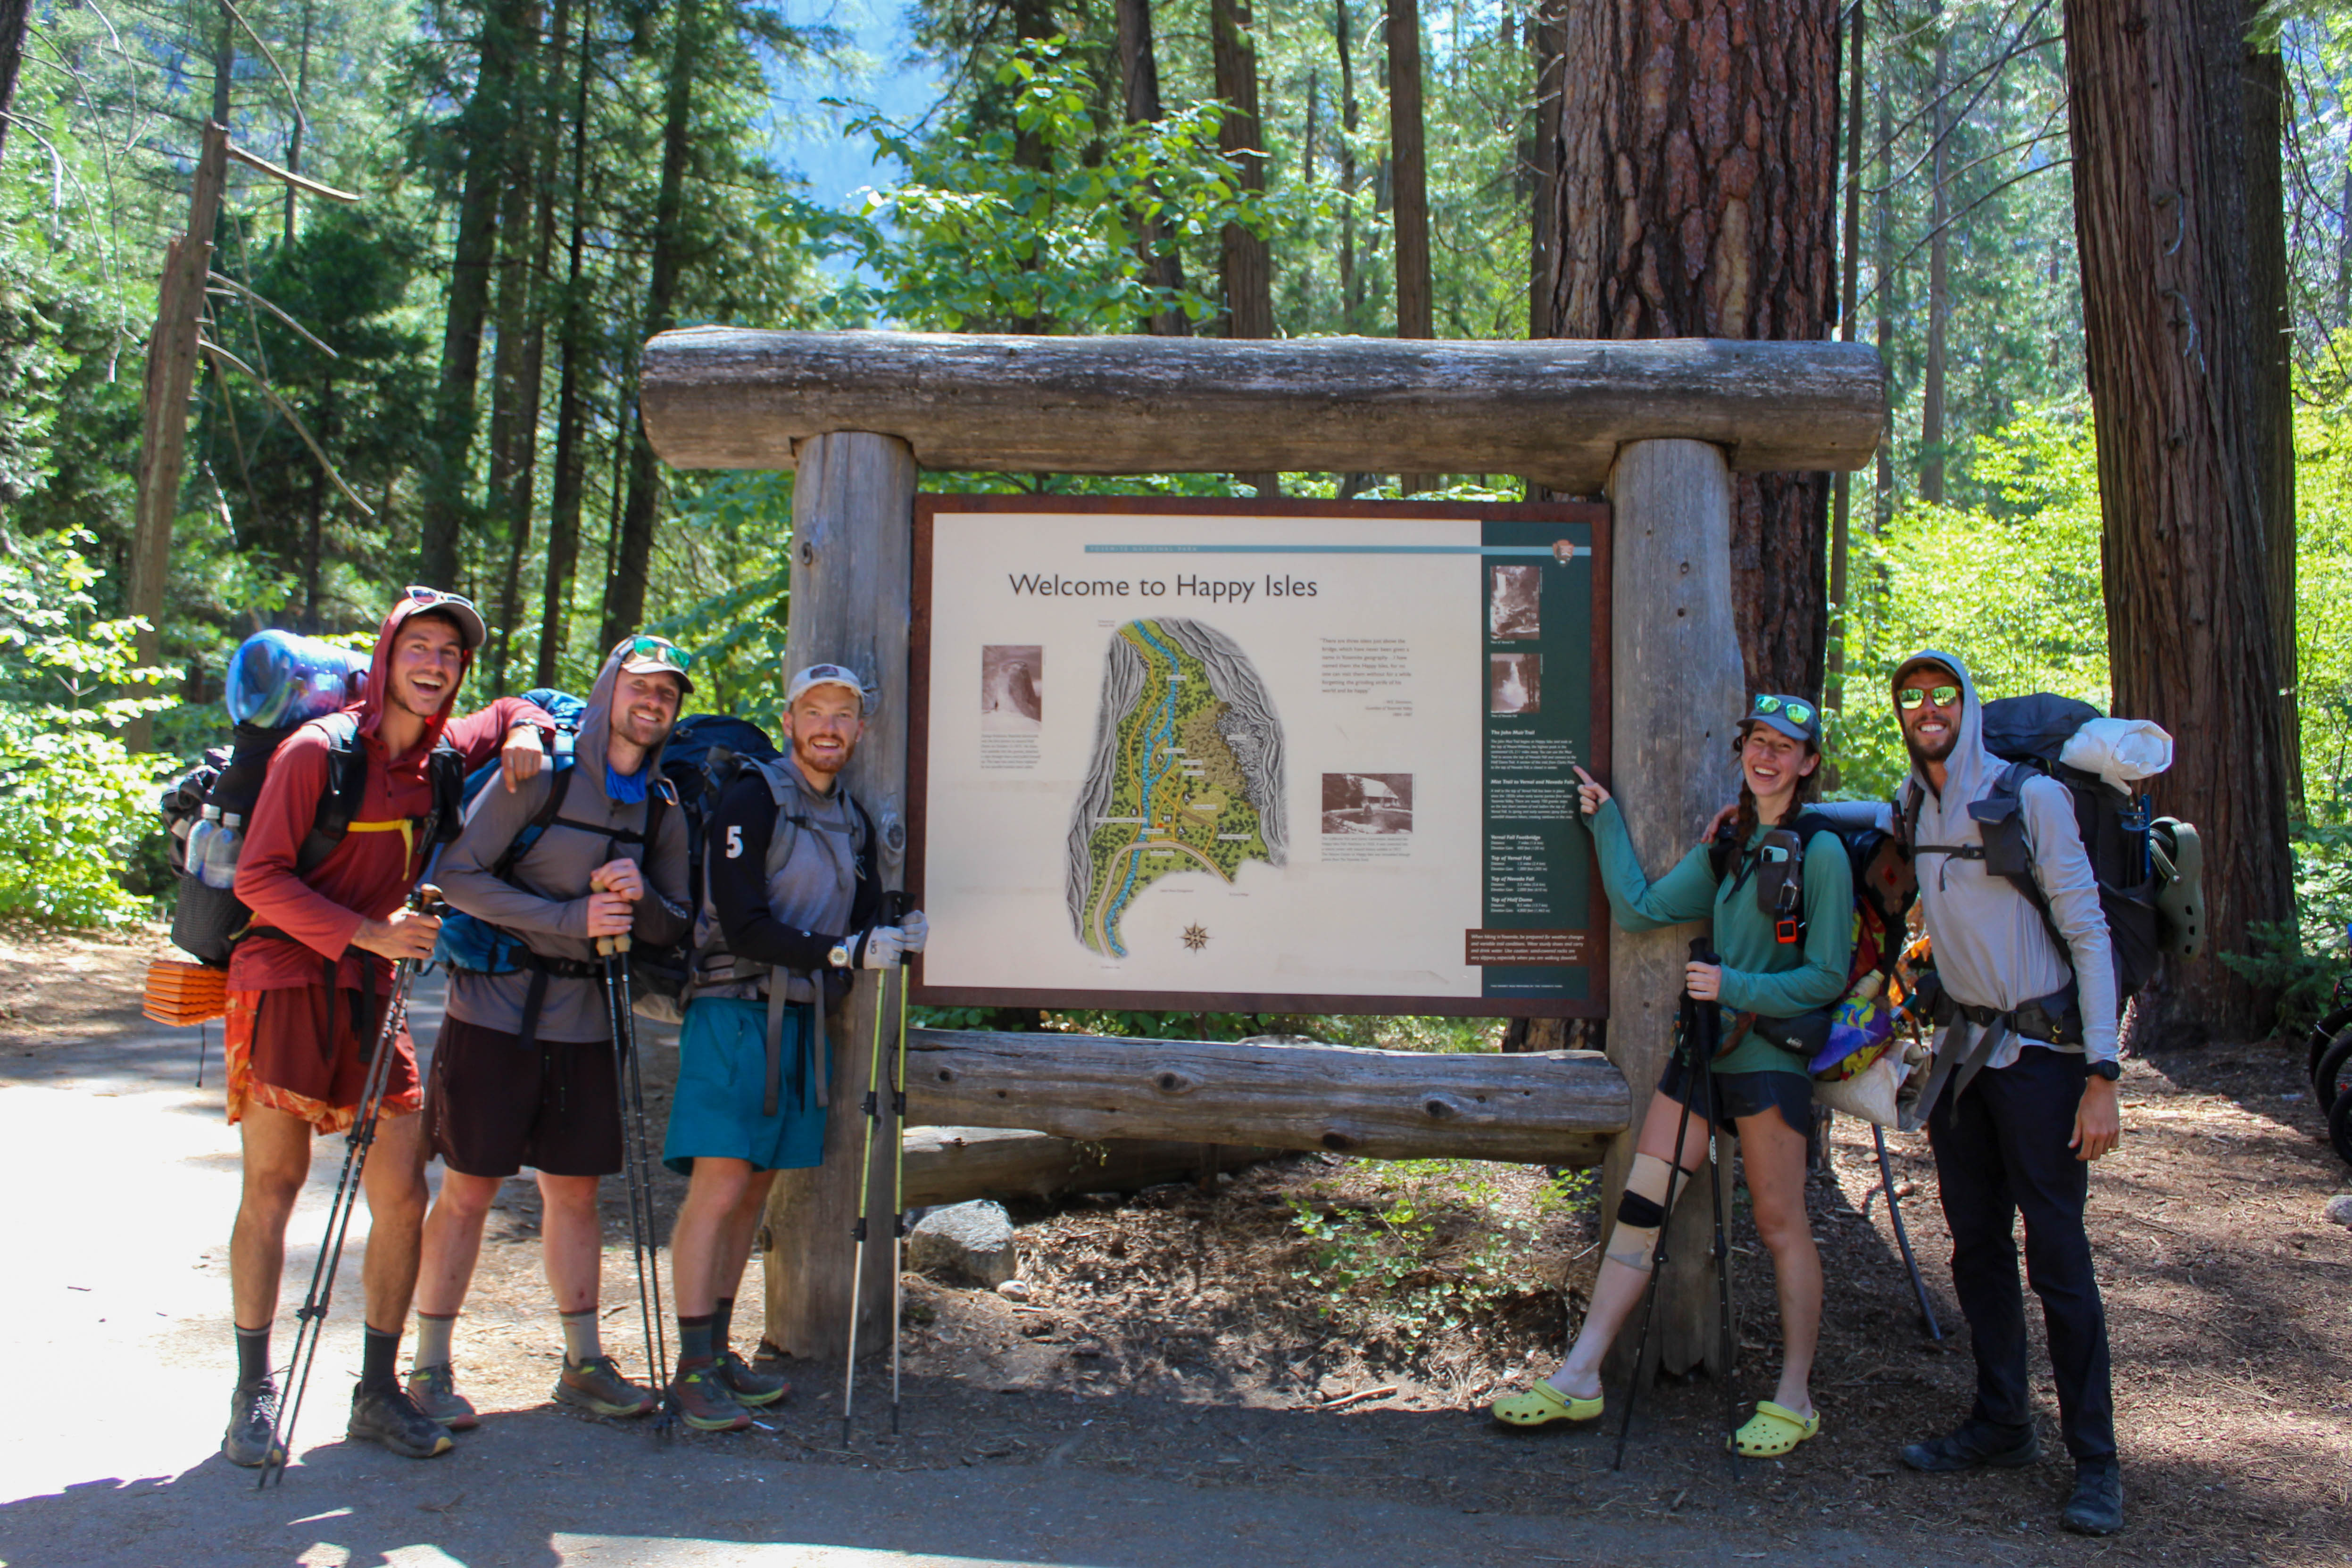 The five of us, once again, standing at the trail terminus in Yosemite. We look both thrilled and relieved.